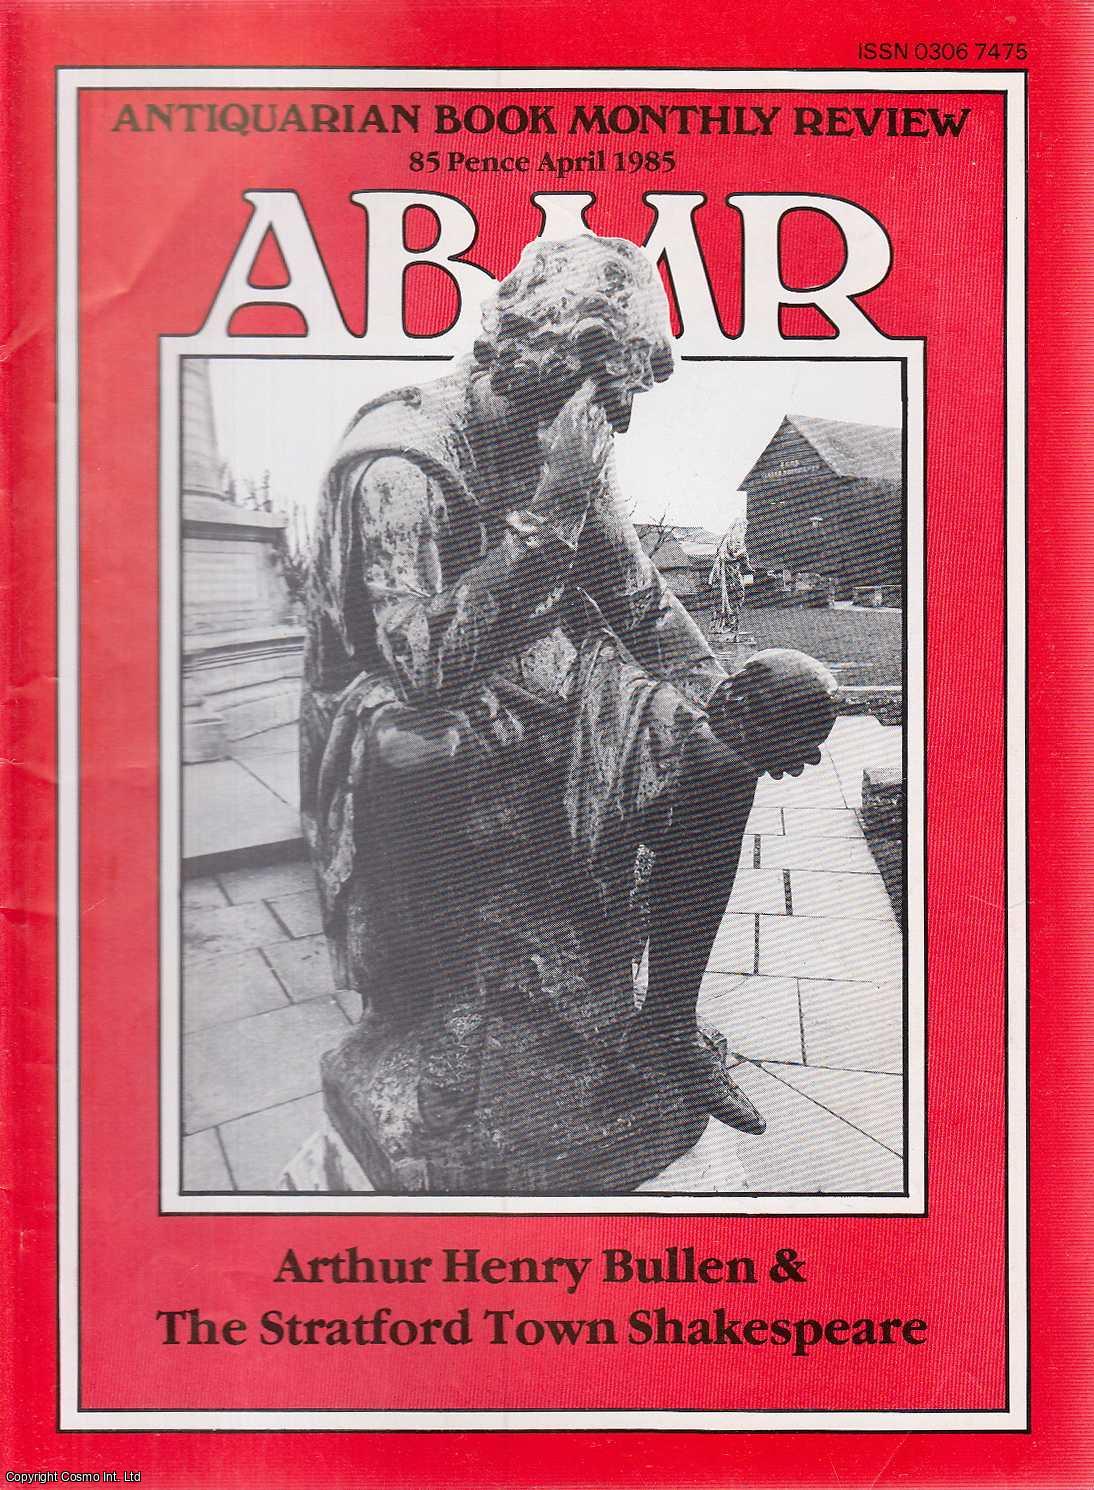 Herbert Jones - Arthur Henry Bullen and the Stratford Town Shakespeare. An original article contained in a complete monthly issue of the Antiquarian Book Monthly Review, 1985.